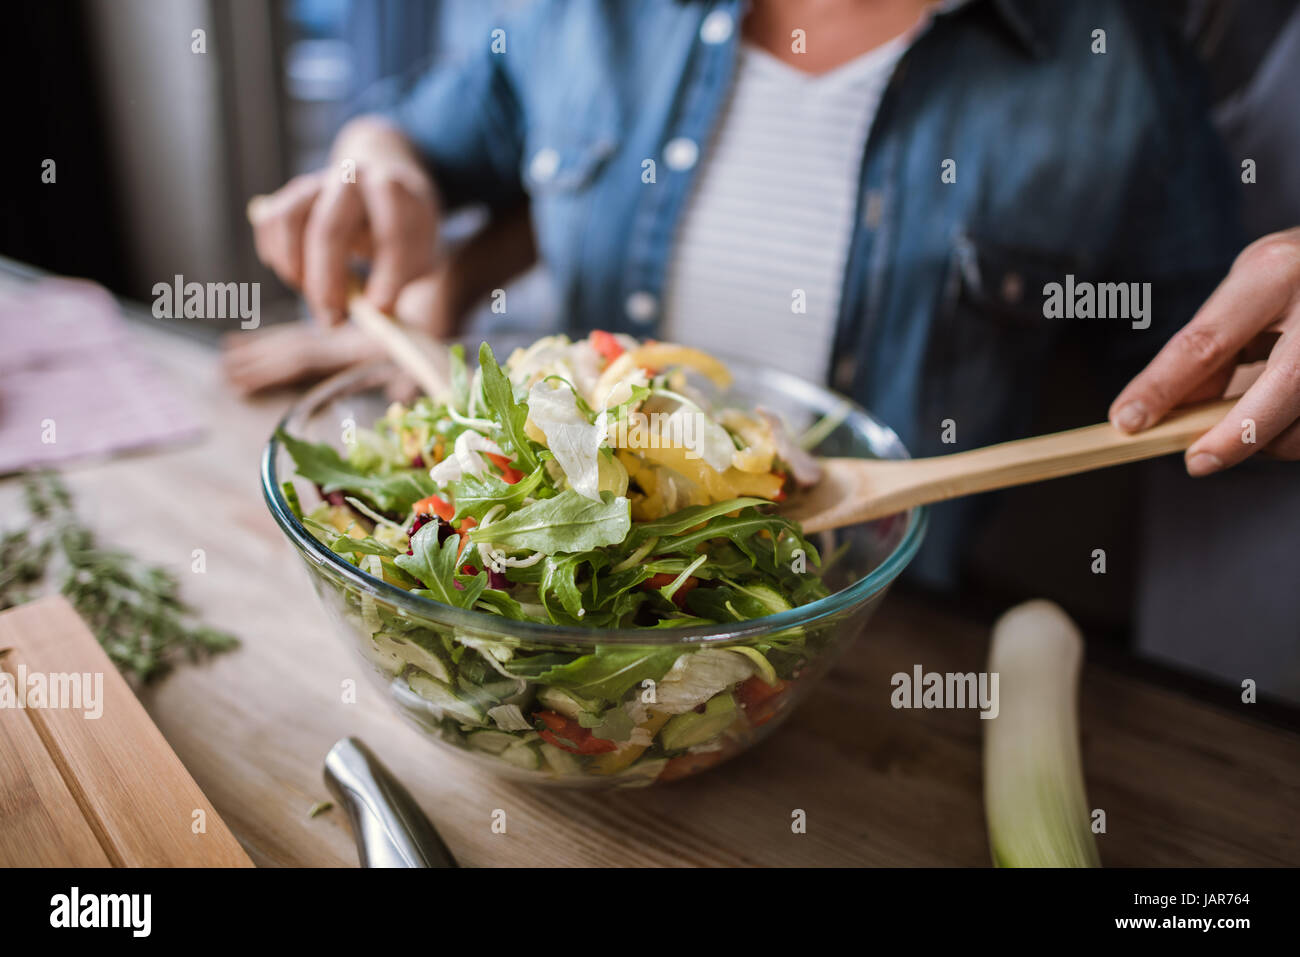 Couple cooking vegetable salad  Stock Photo